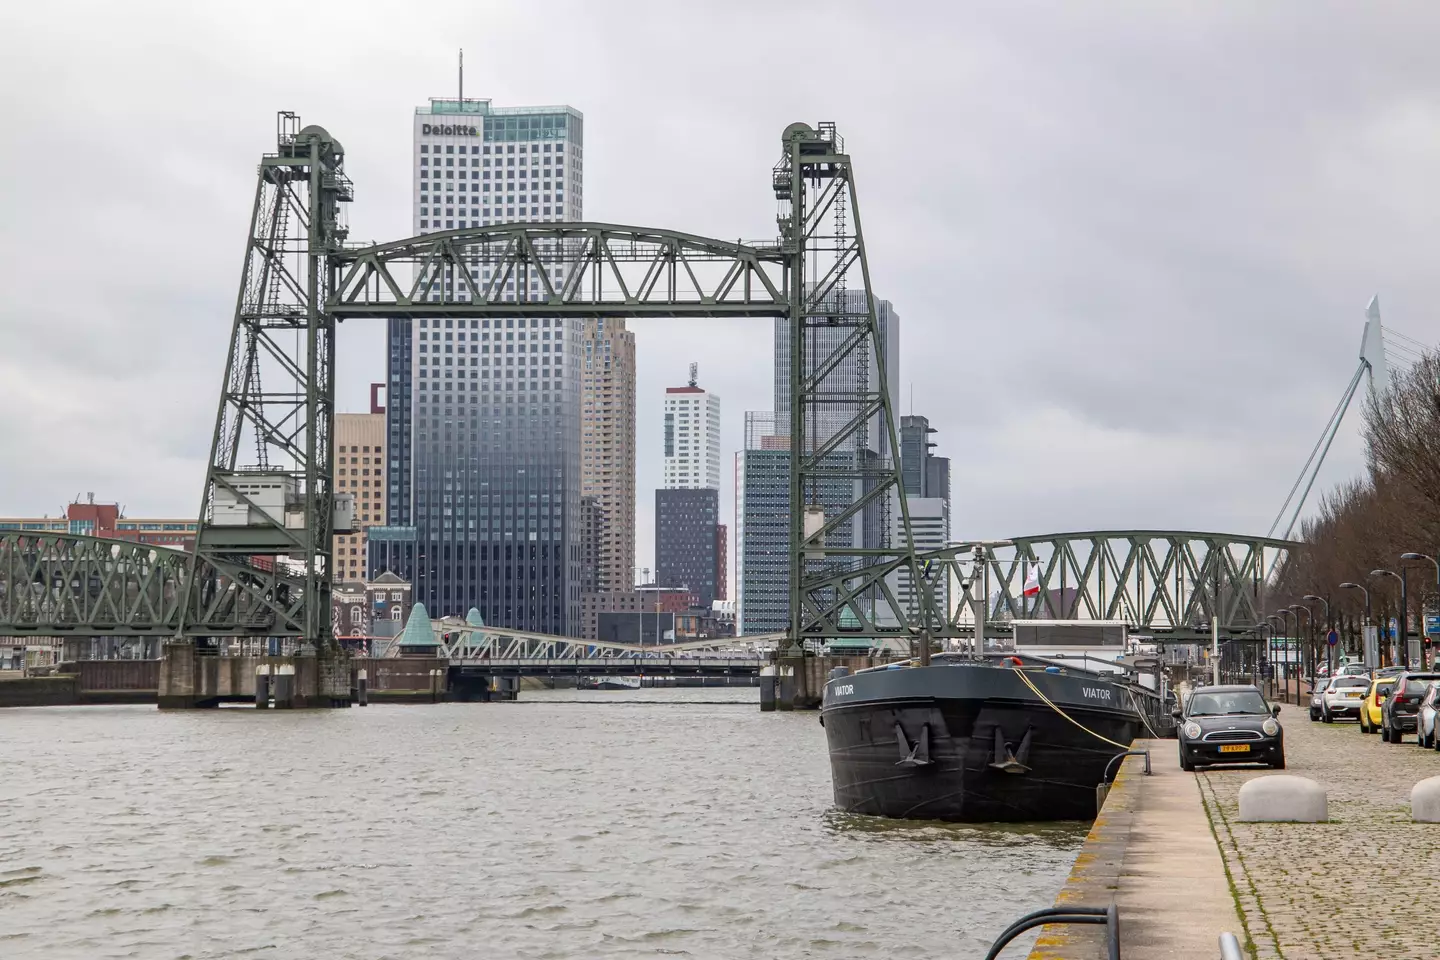 The bridge in Rotterdam has been in place since 1878.